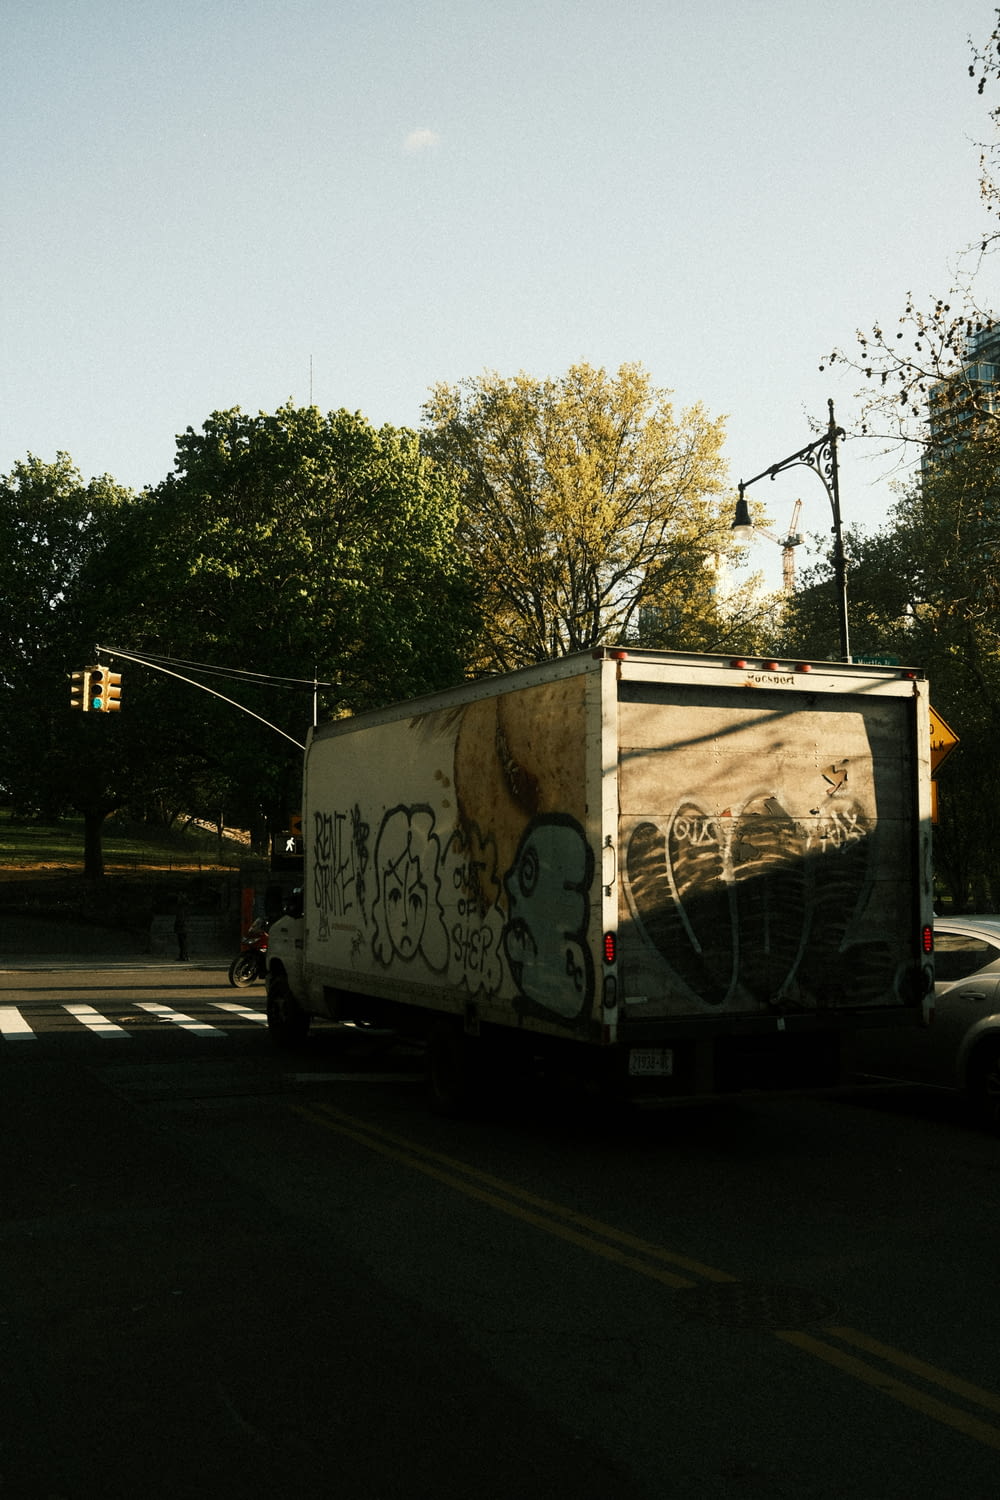 a truck with graffiti driving down a street